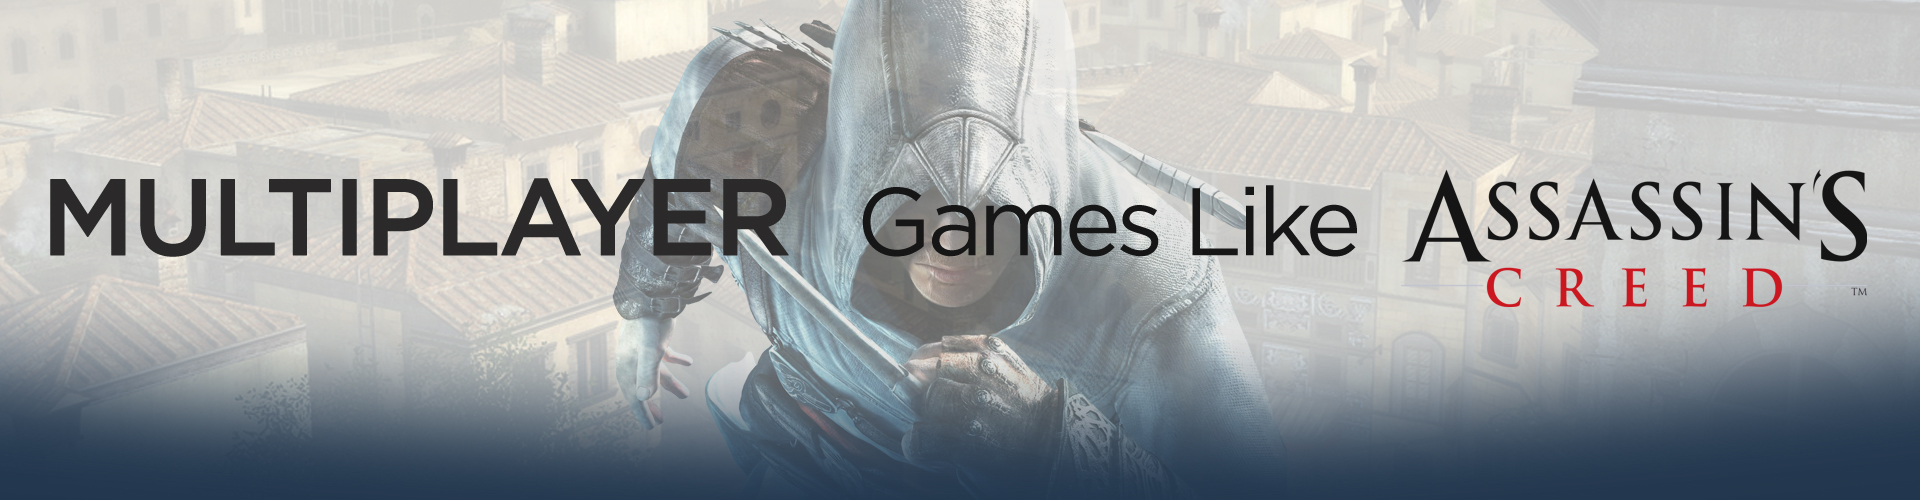 Multiplayer Games like Assassin's Creed